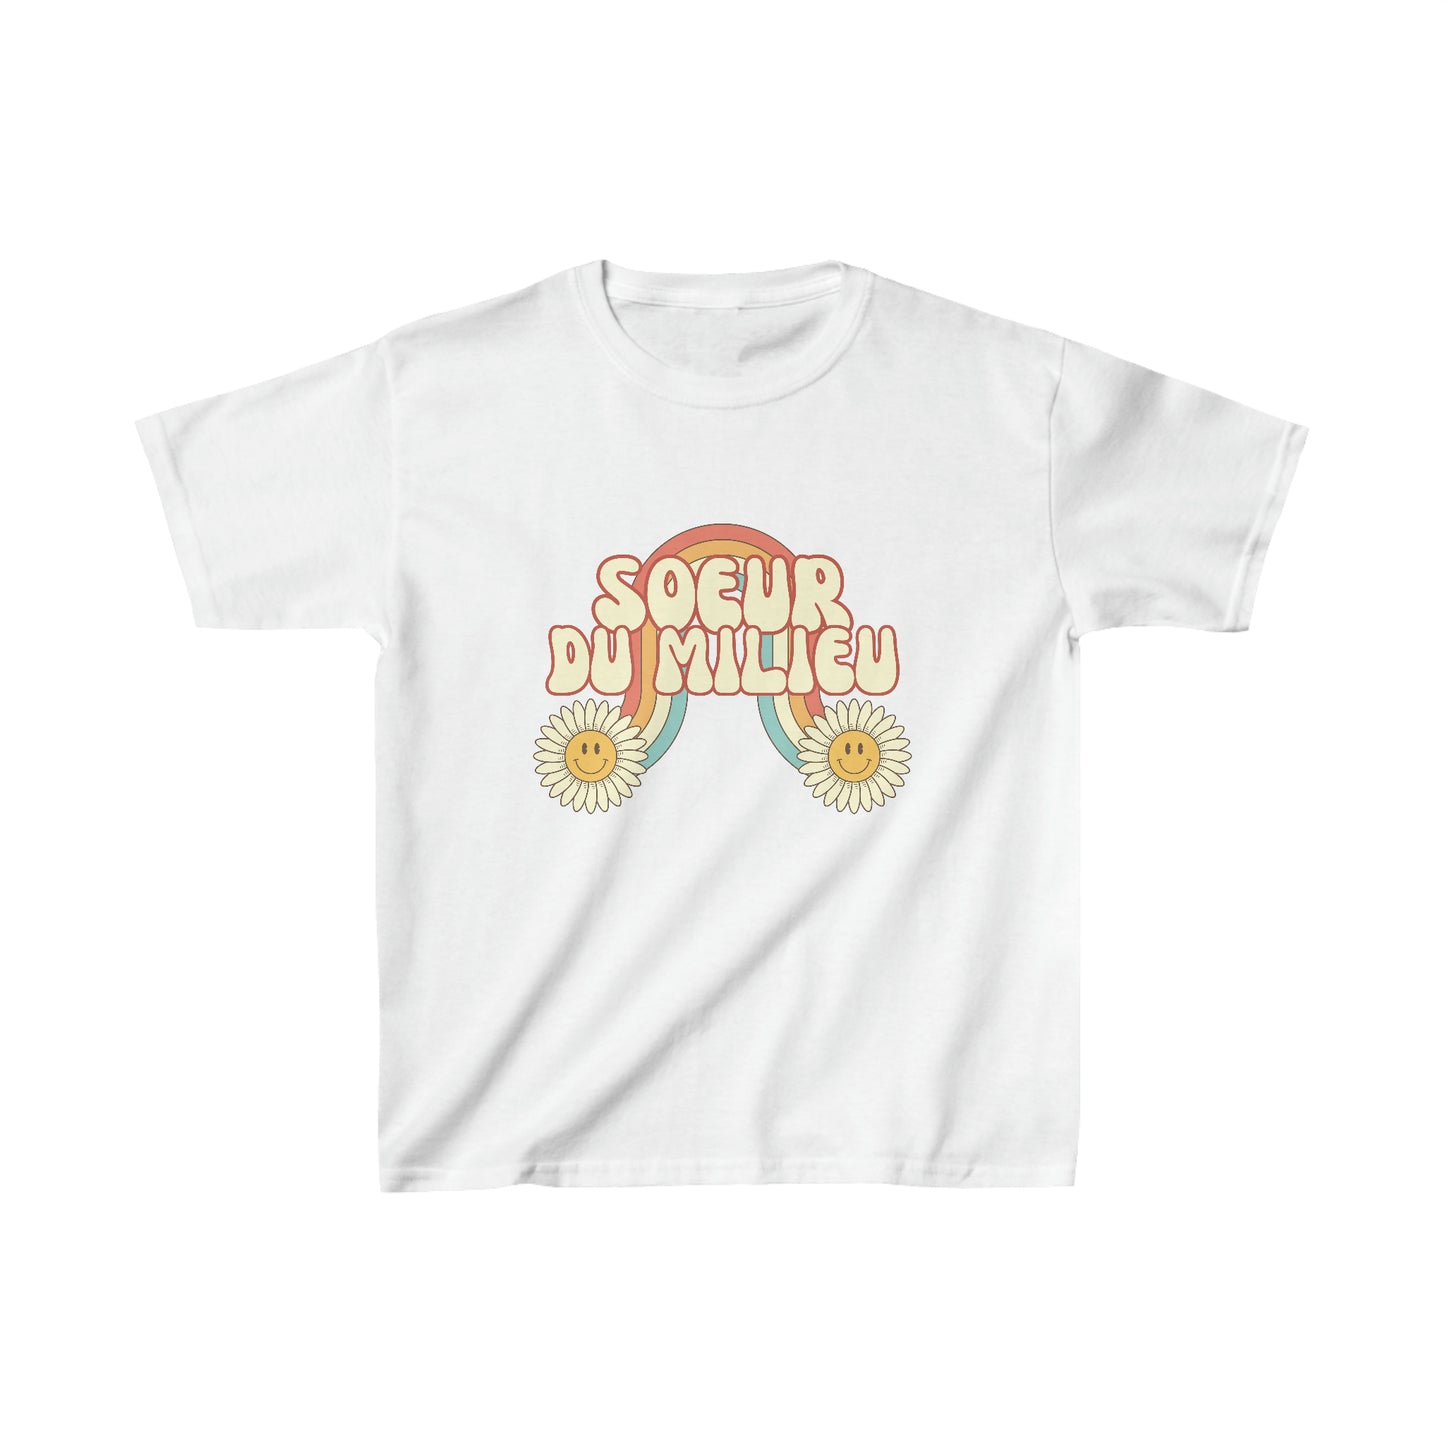 MIDDLE SISTER T-shirt - child